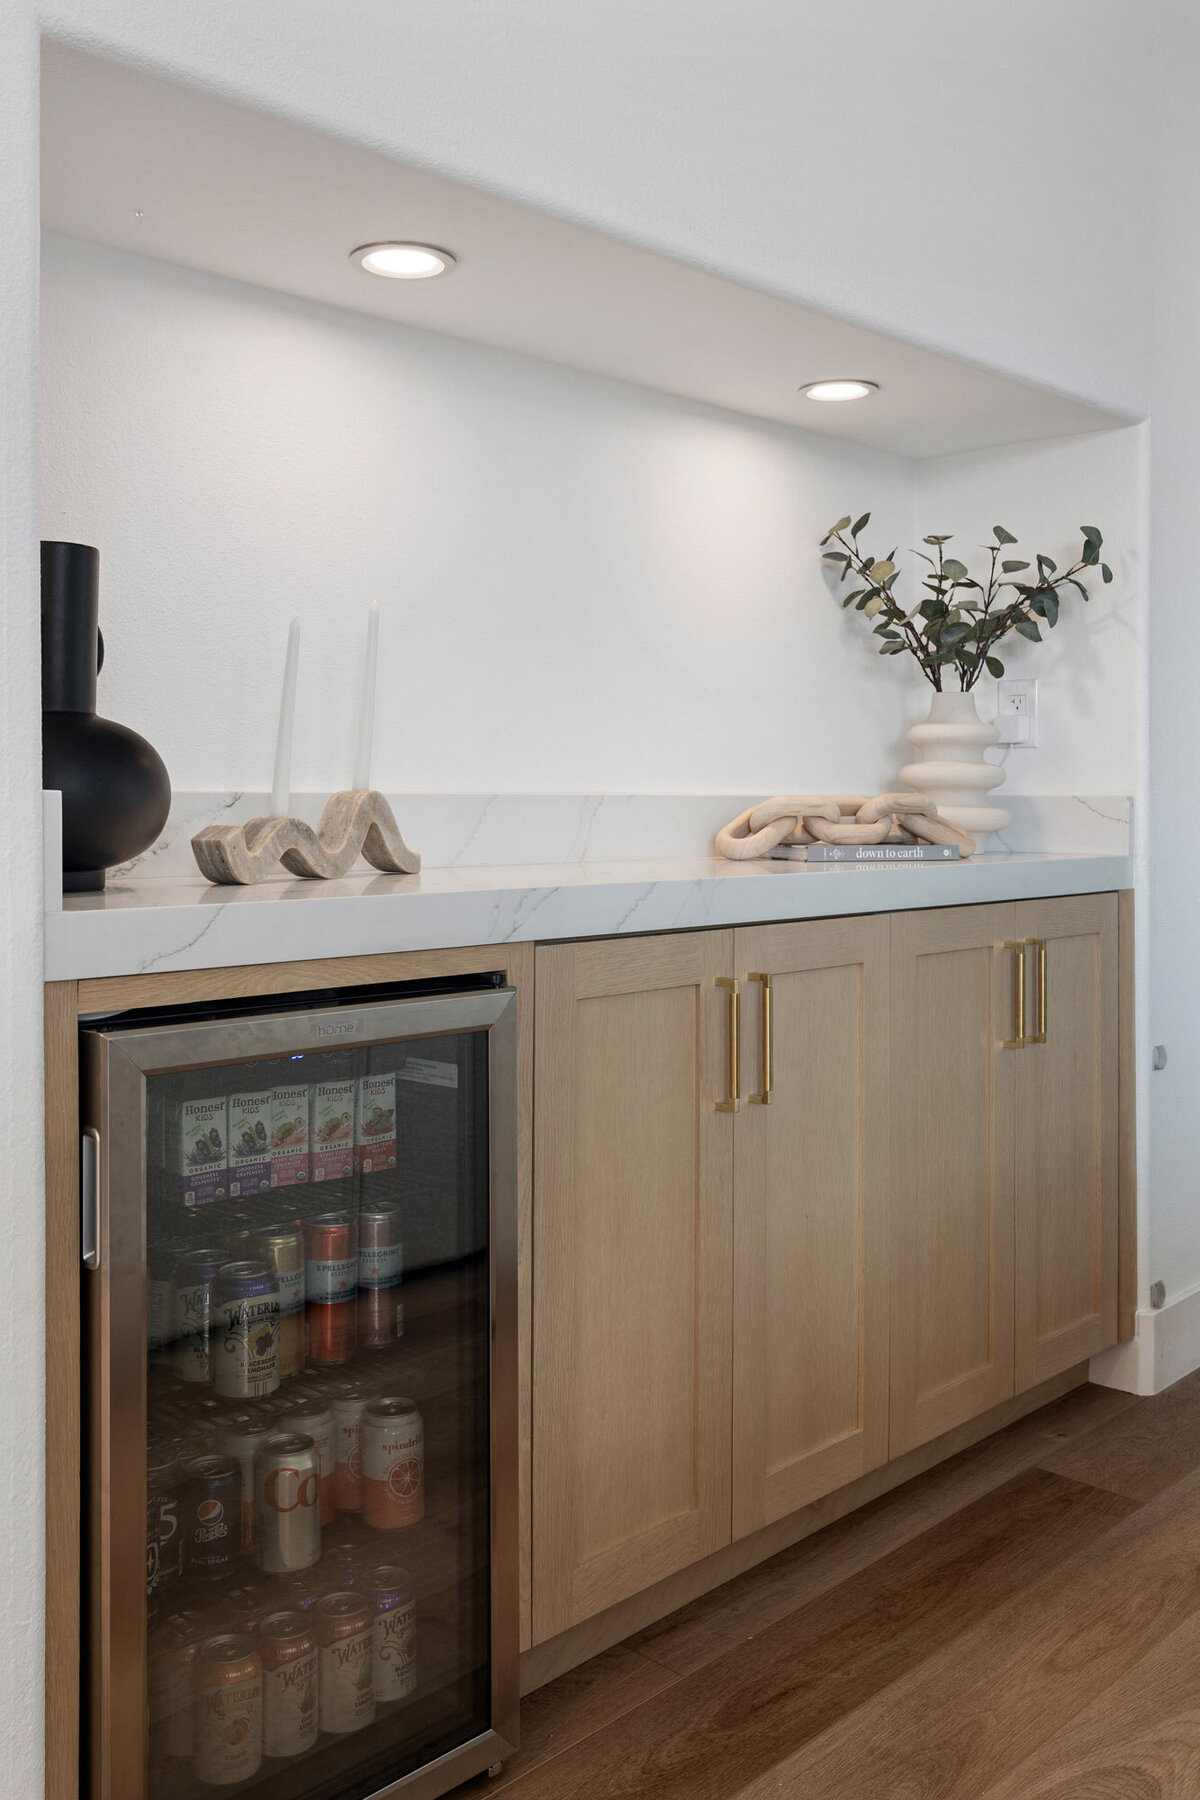 very culinary enthusiast would appreciate the blend of form and function in this space. The expansive marble-topped island is perfect for meal prep, and the state-of-the-art appliances promise efficiency. Natural wood elements balance the modern design.